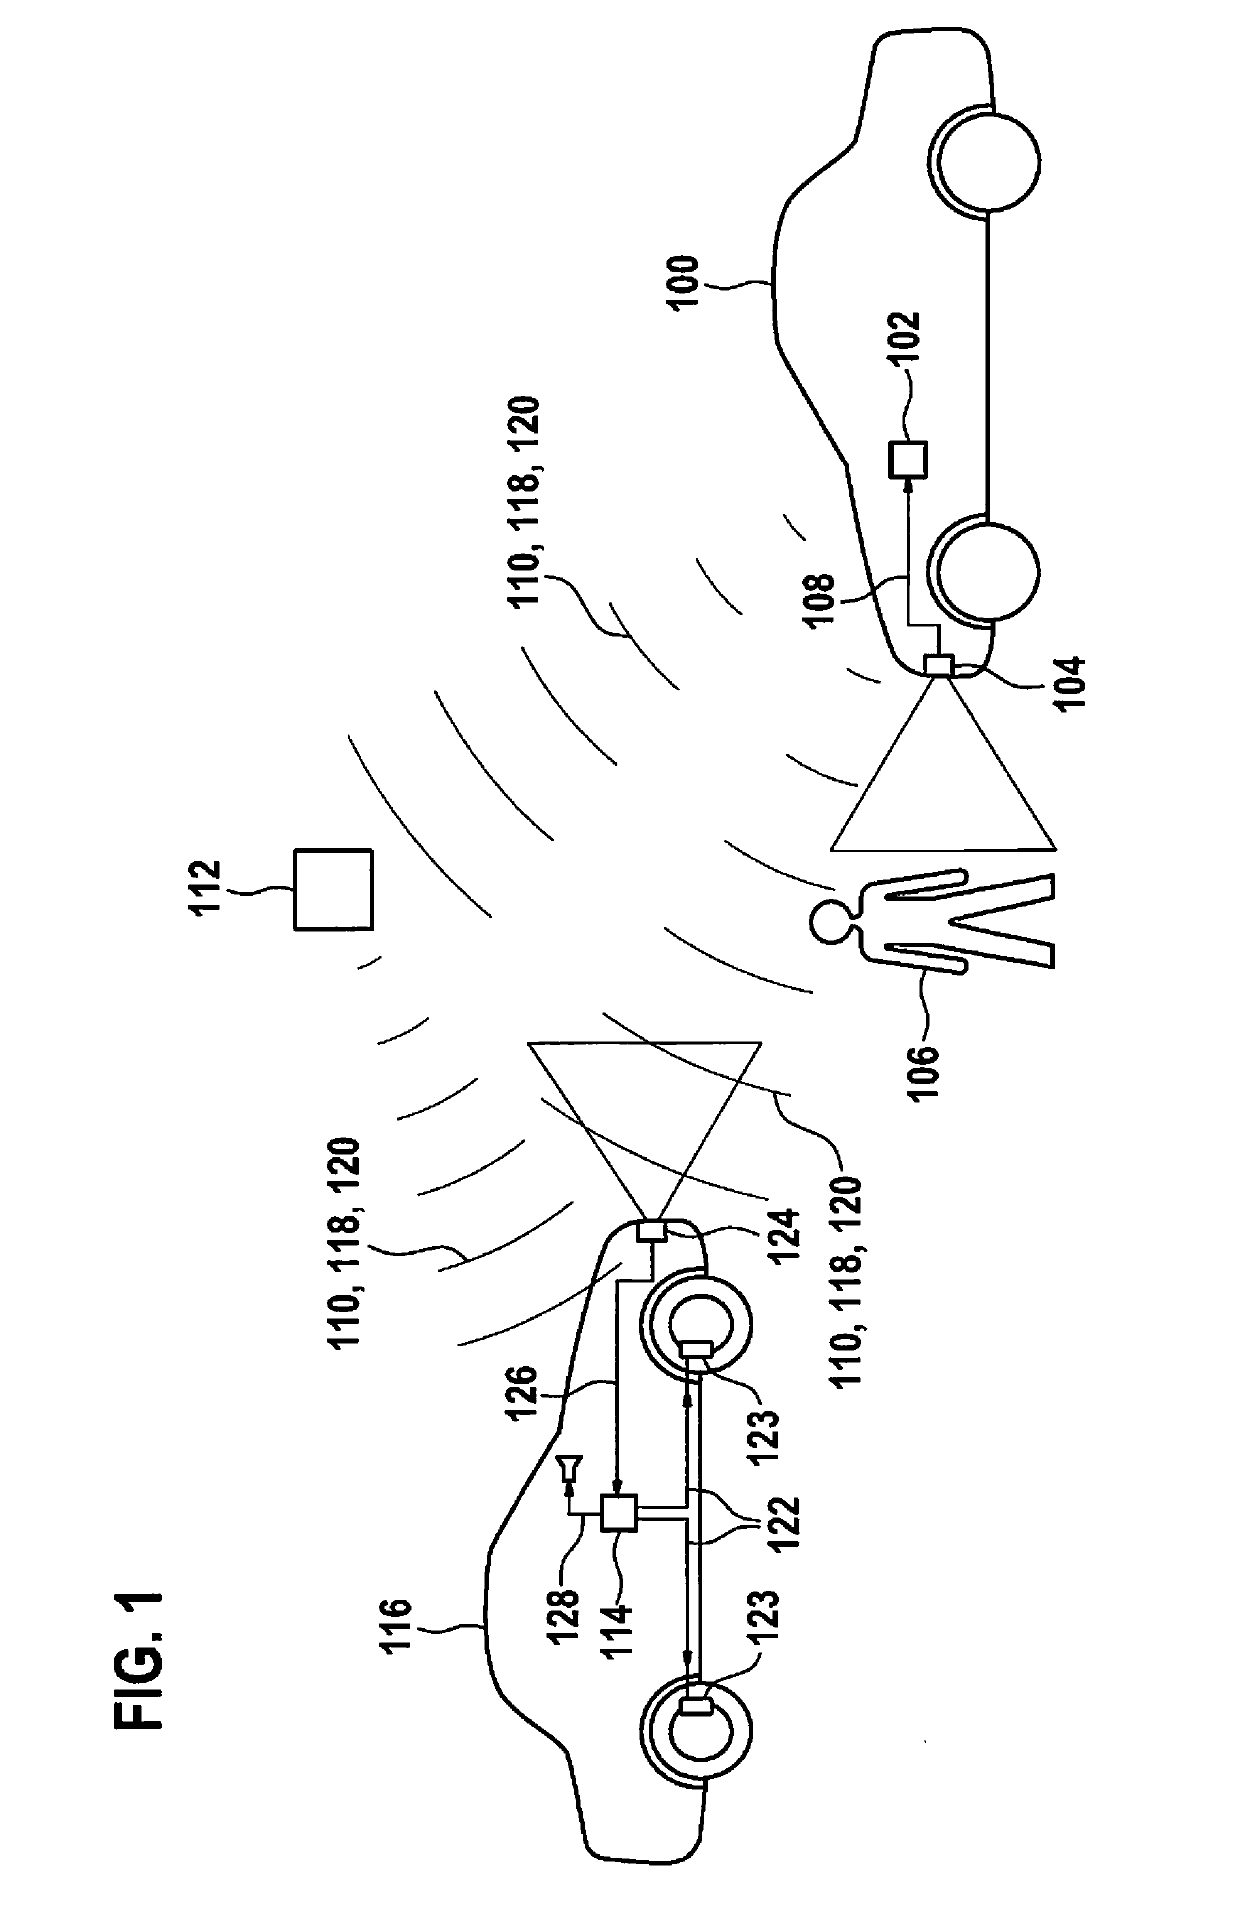 Method for providing an information item regarding a pedestrian in an environment of a vehicle and method for controlling a vehicle